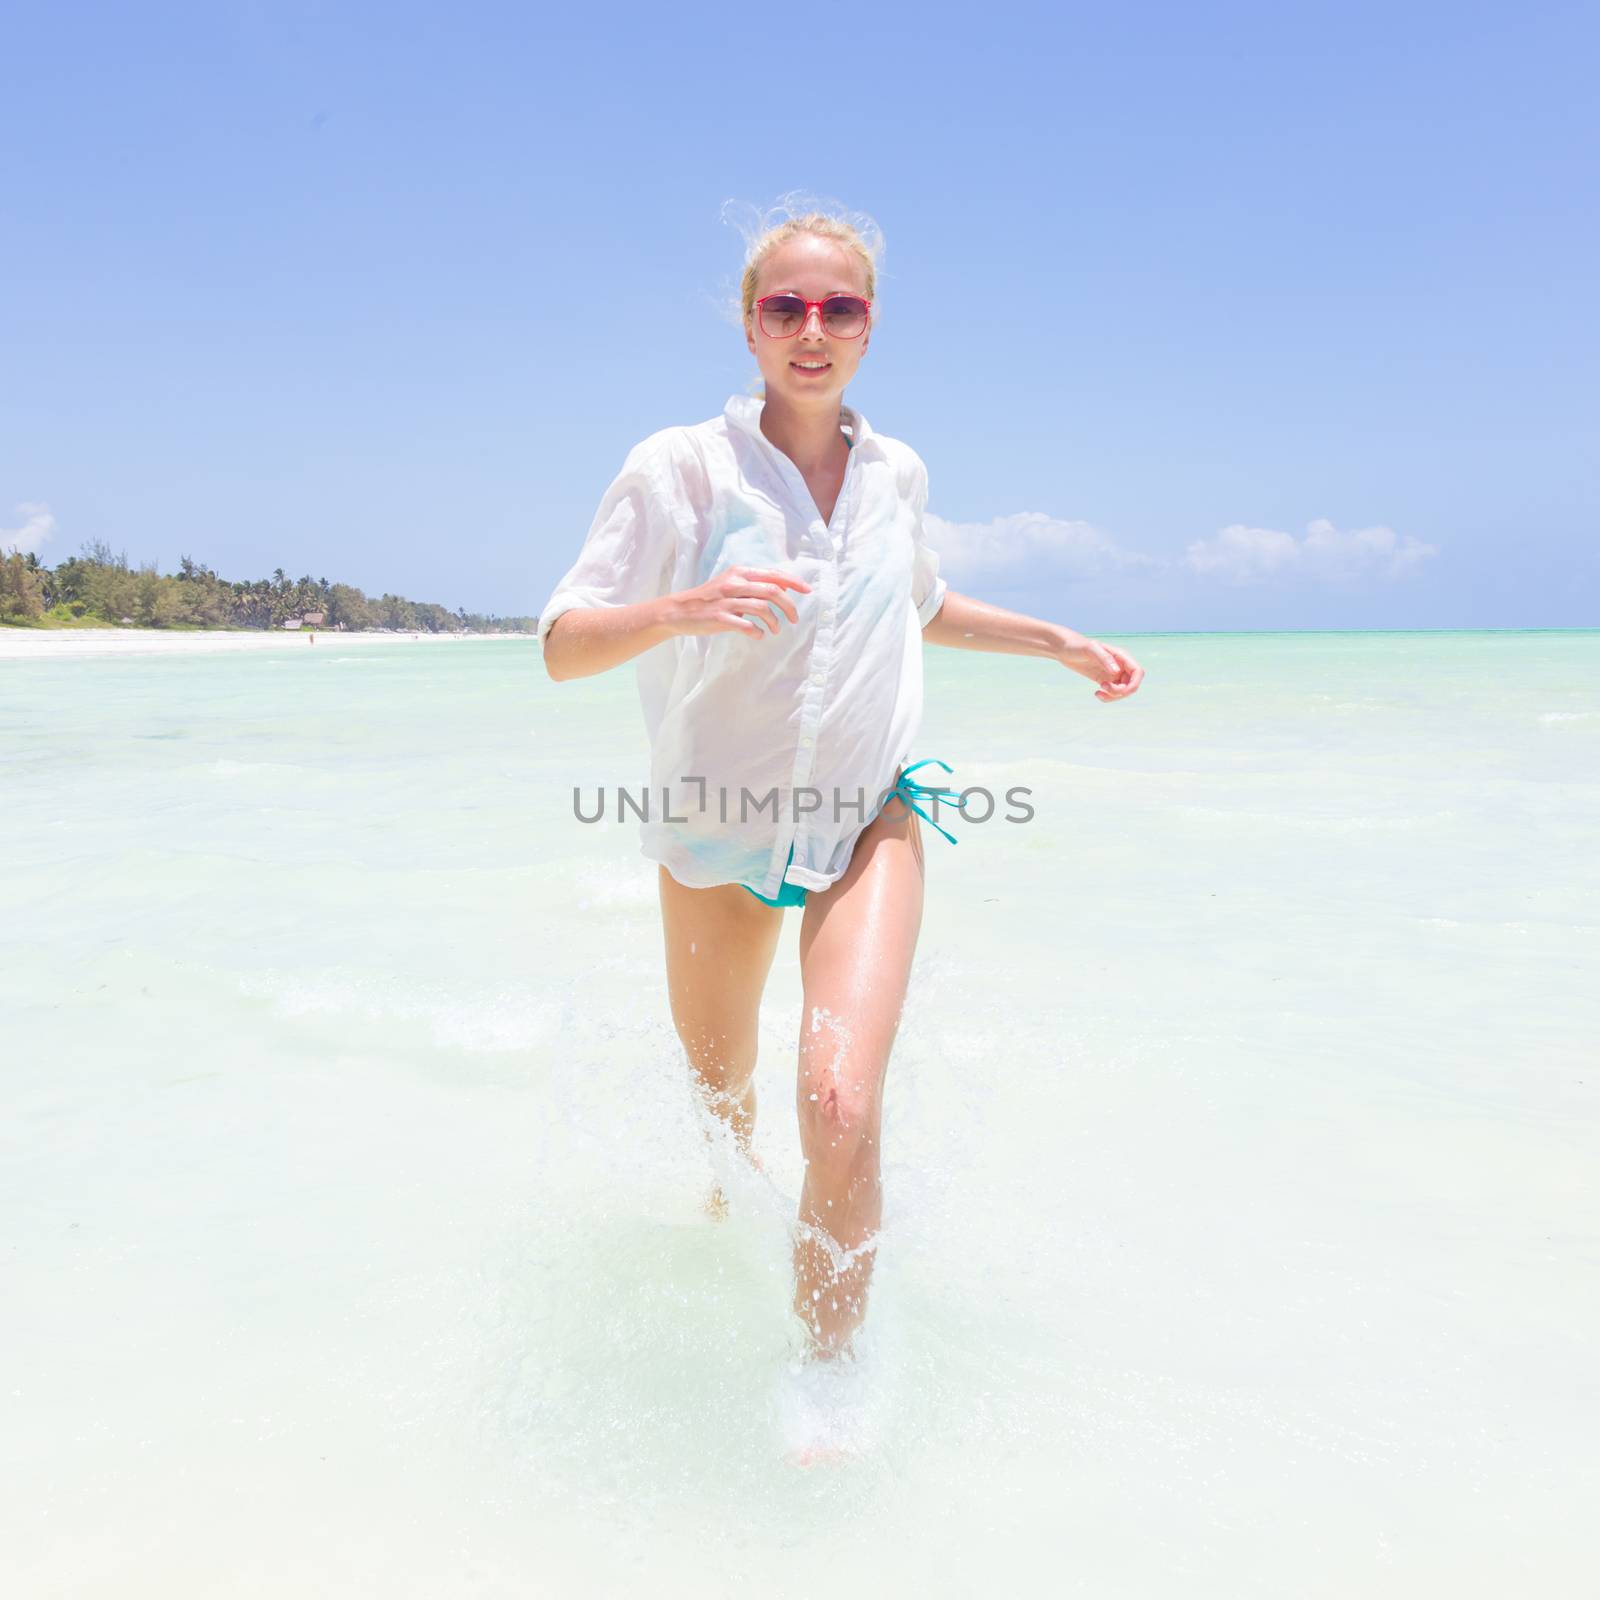 Young slim fit woman wearing white beach tunic running in sea water making water splashes with her legs. Vacation concept. Summer mood. Tropical beach setting. Paje, Zanzibar, Tanzania.